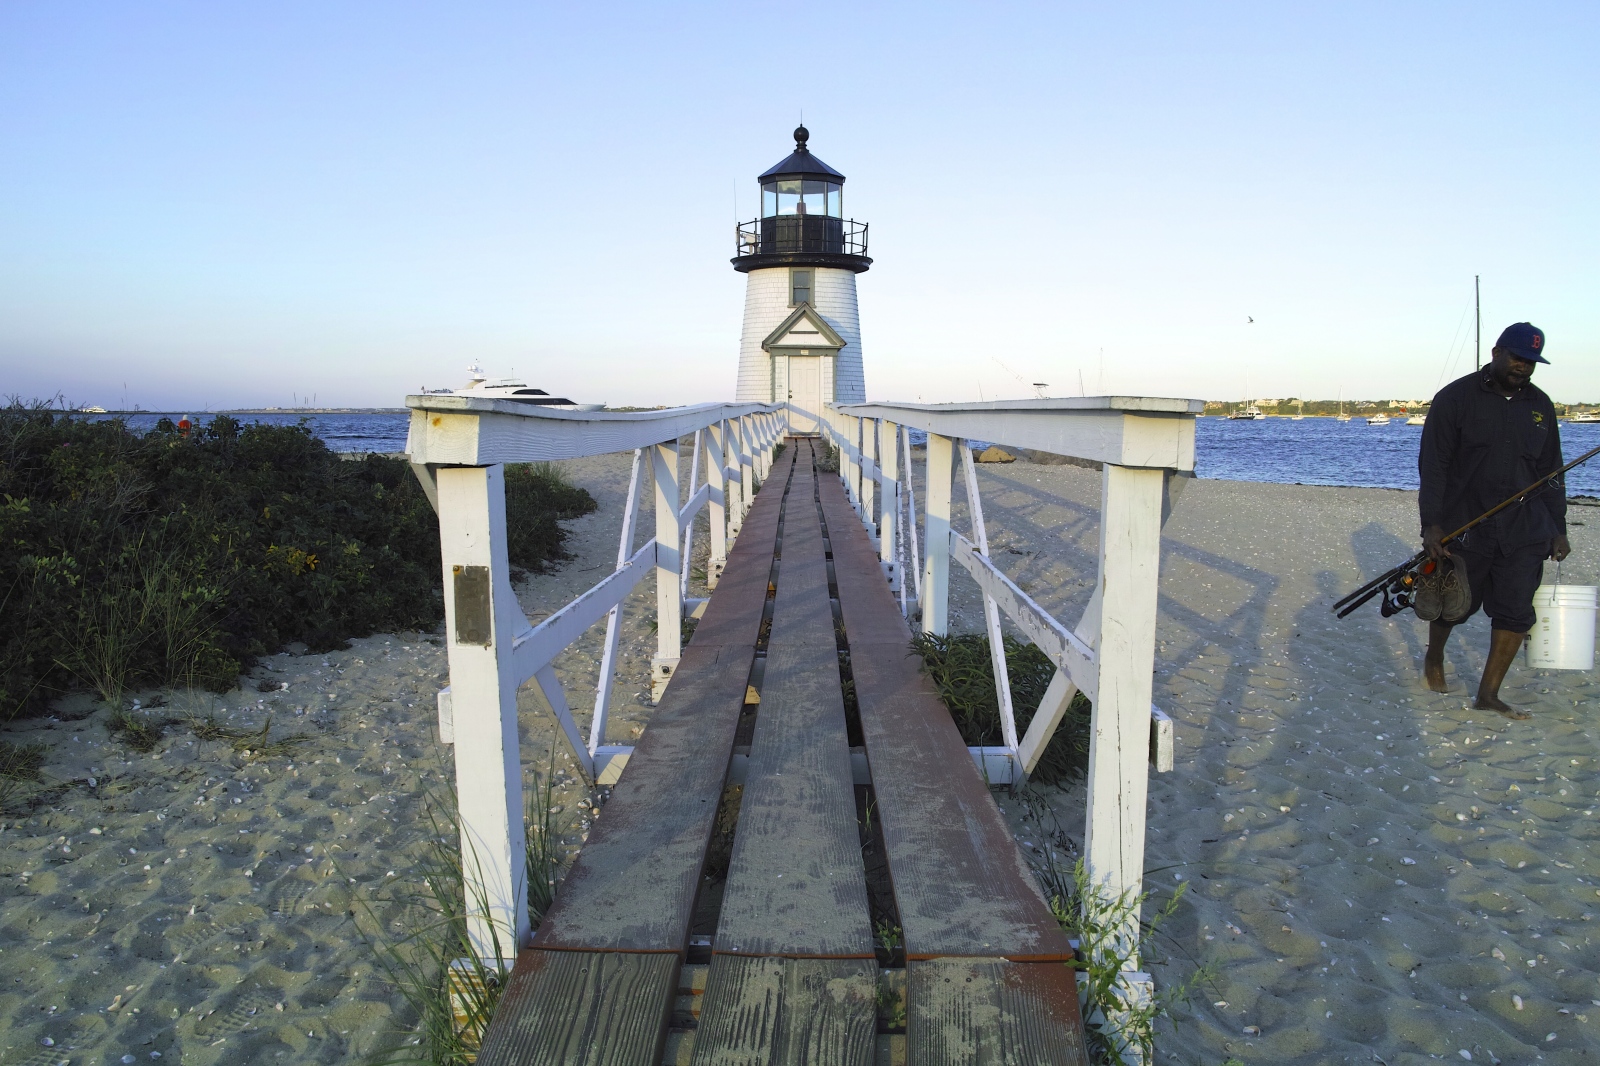 At the Water's Edge - Fisherman and Lighthouse, Brant Point, Nantucket,...